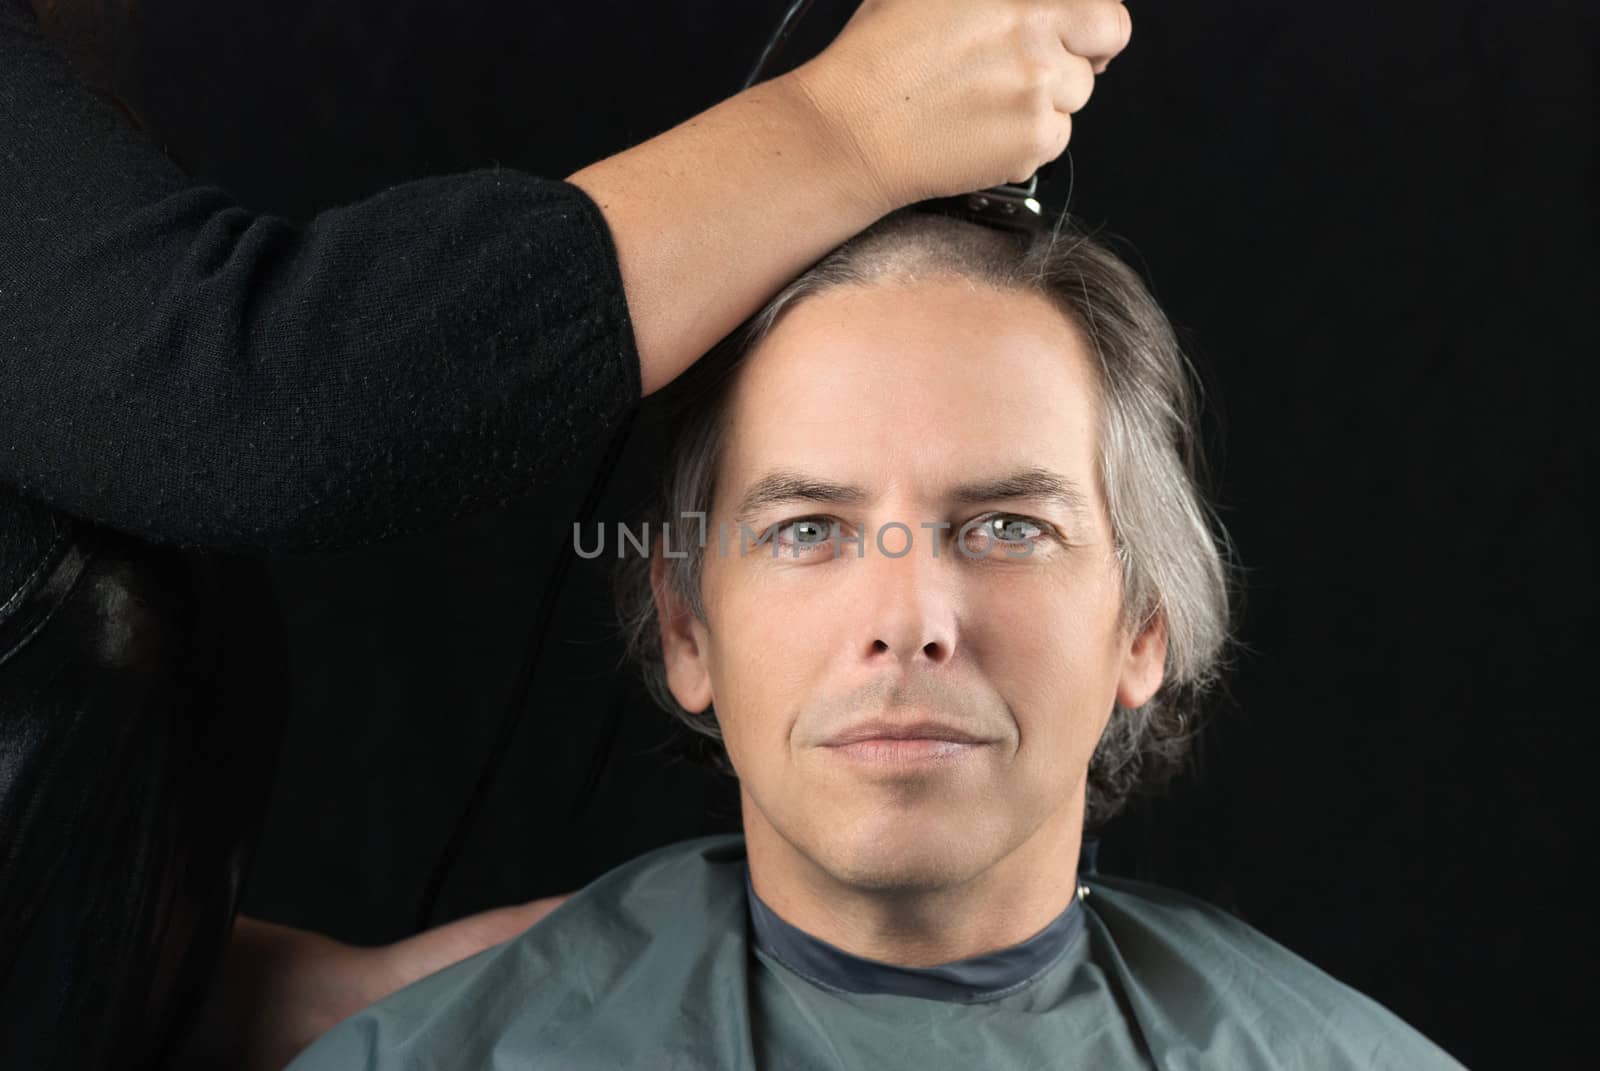 Close-up of a serious man looking to camera while his long hair is shaved off for a cancer fundraiser.